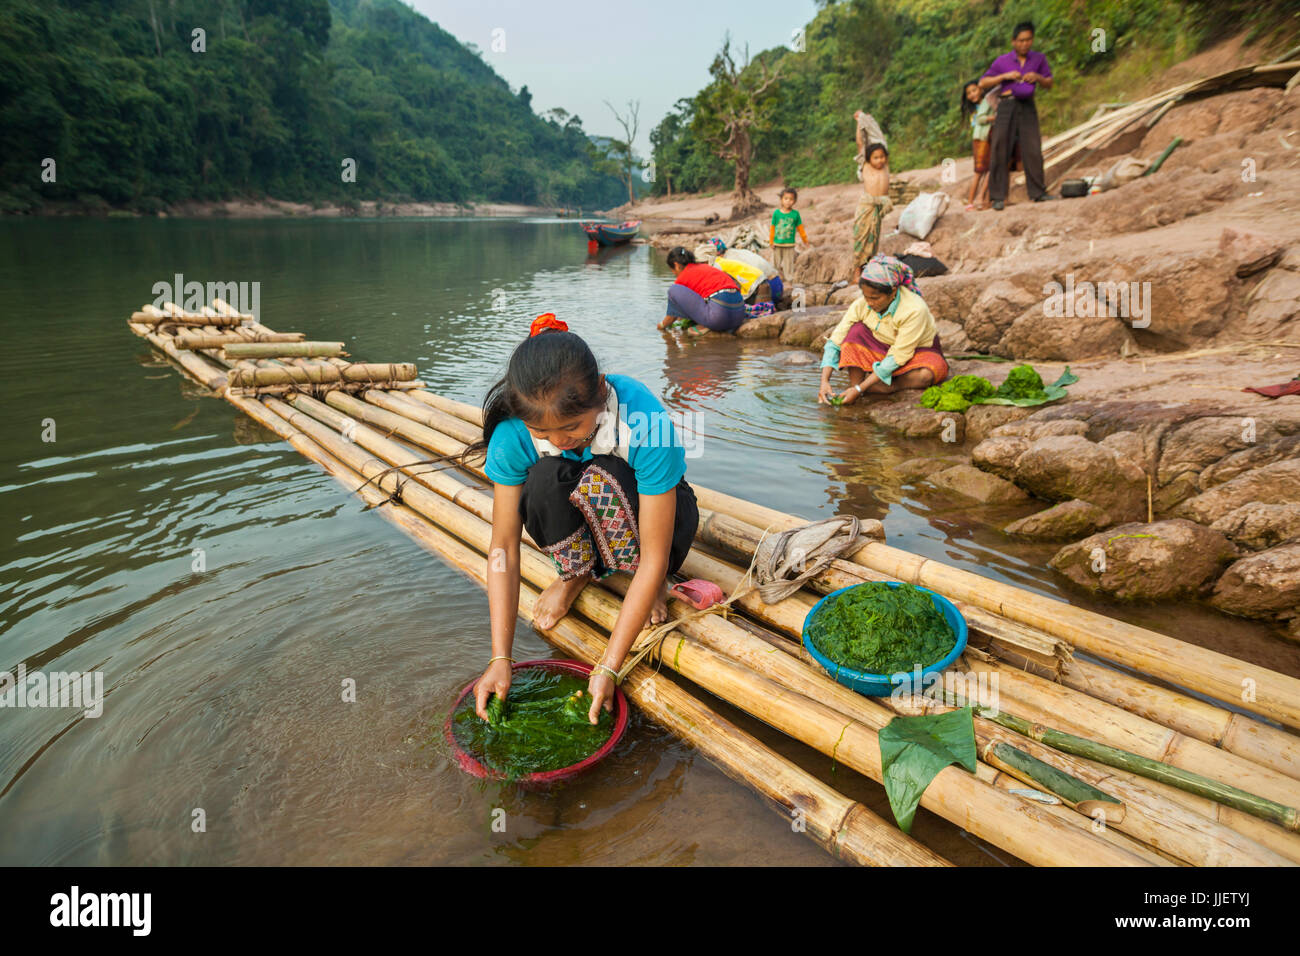 Women collect rock river weed (Cladophora sp.) on the shore of the Nam Ou River in Ban Phu Muang, Laos. The green algae is commonly eaten as a delicacy, either boiled or dried in sheets. Stock Photo